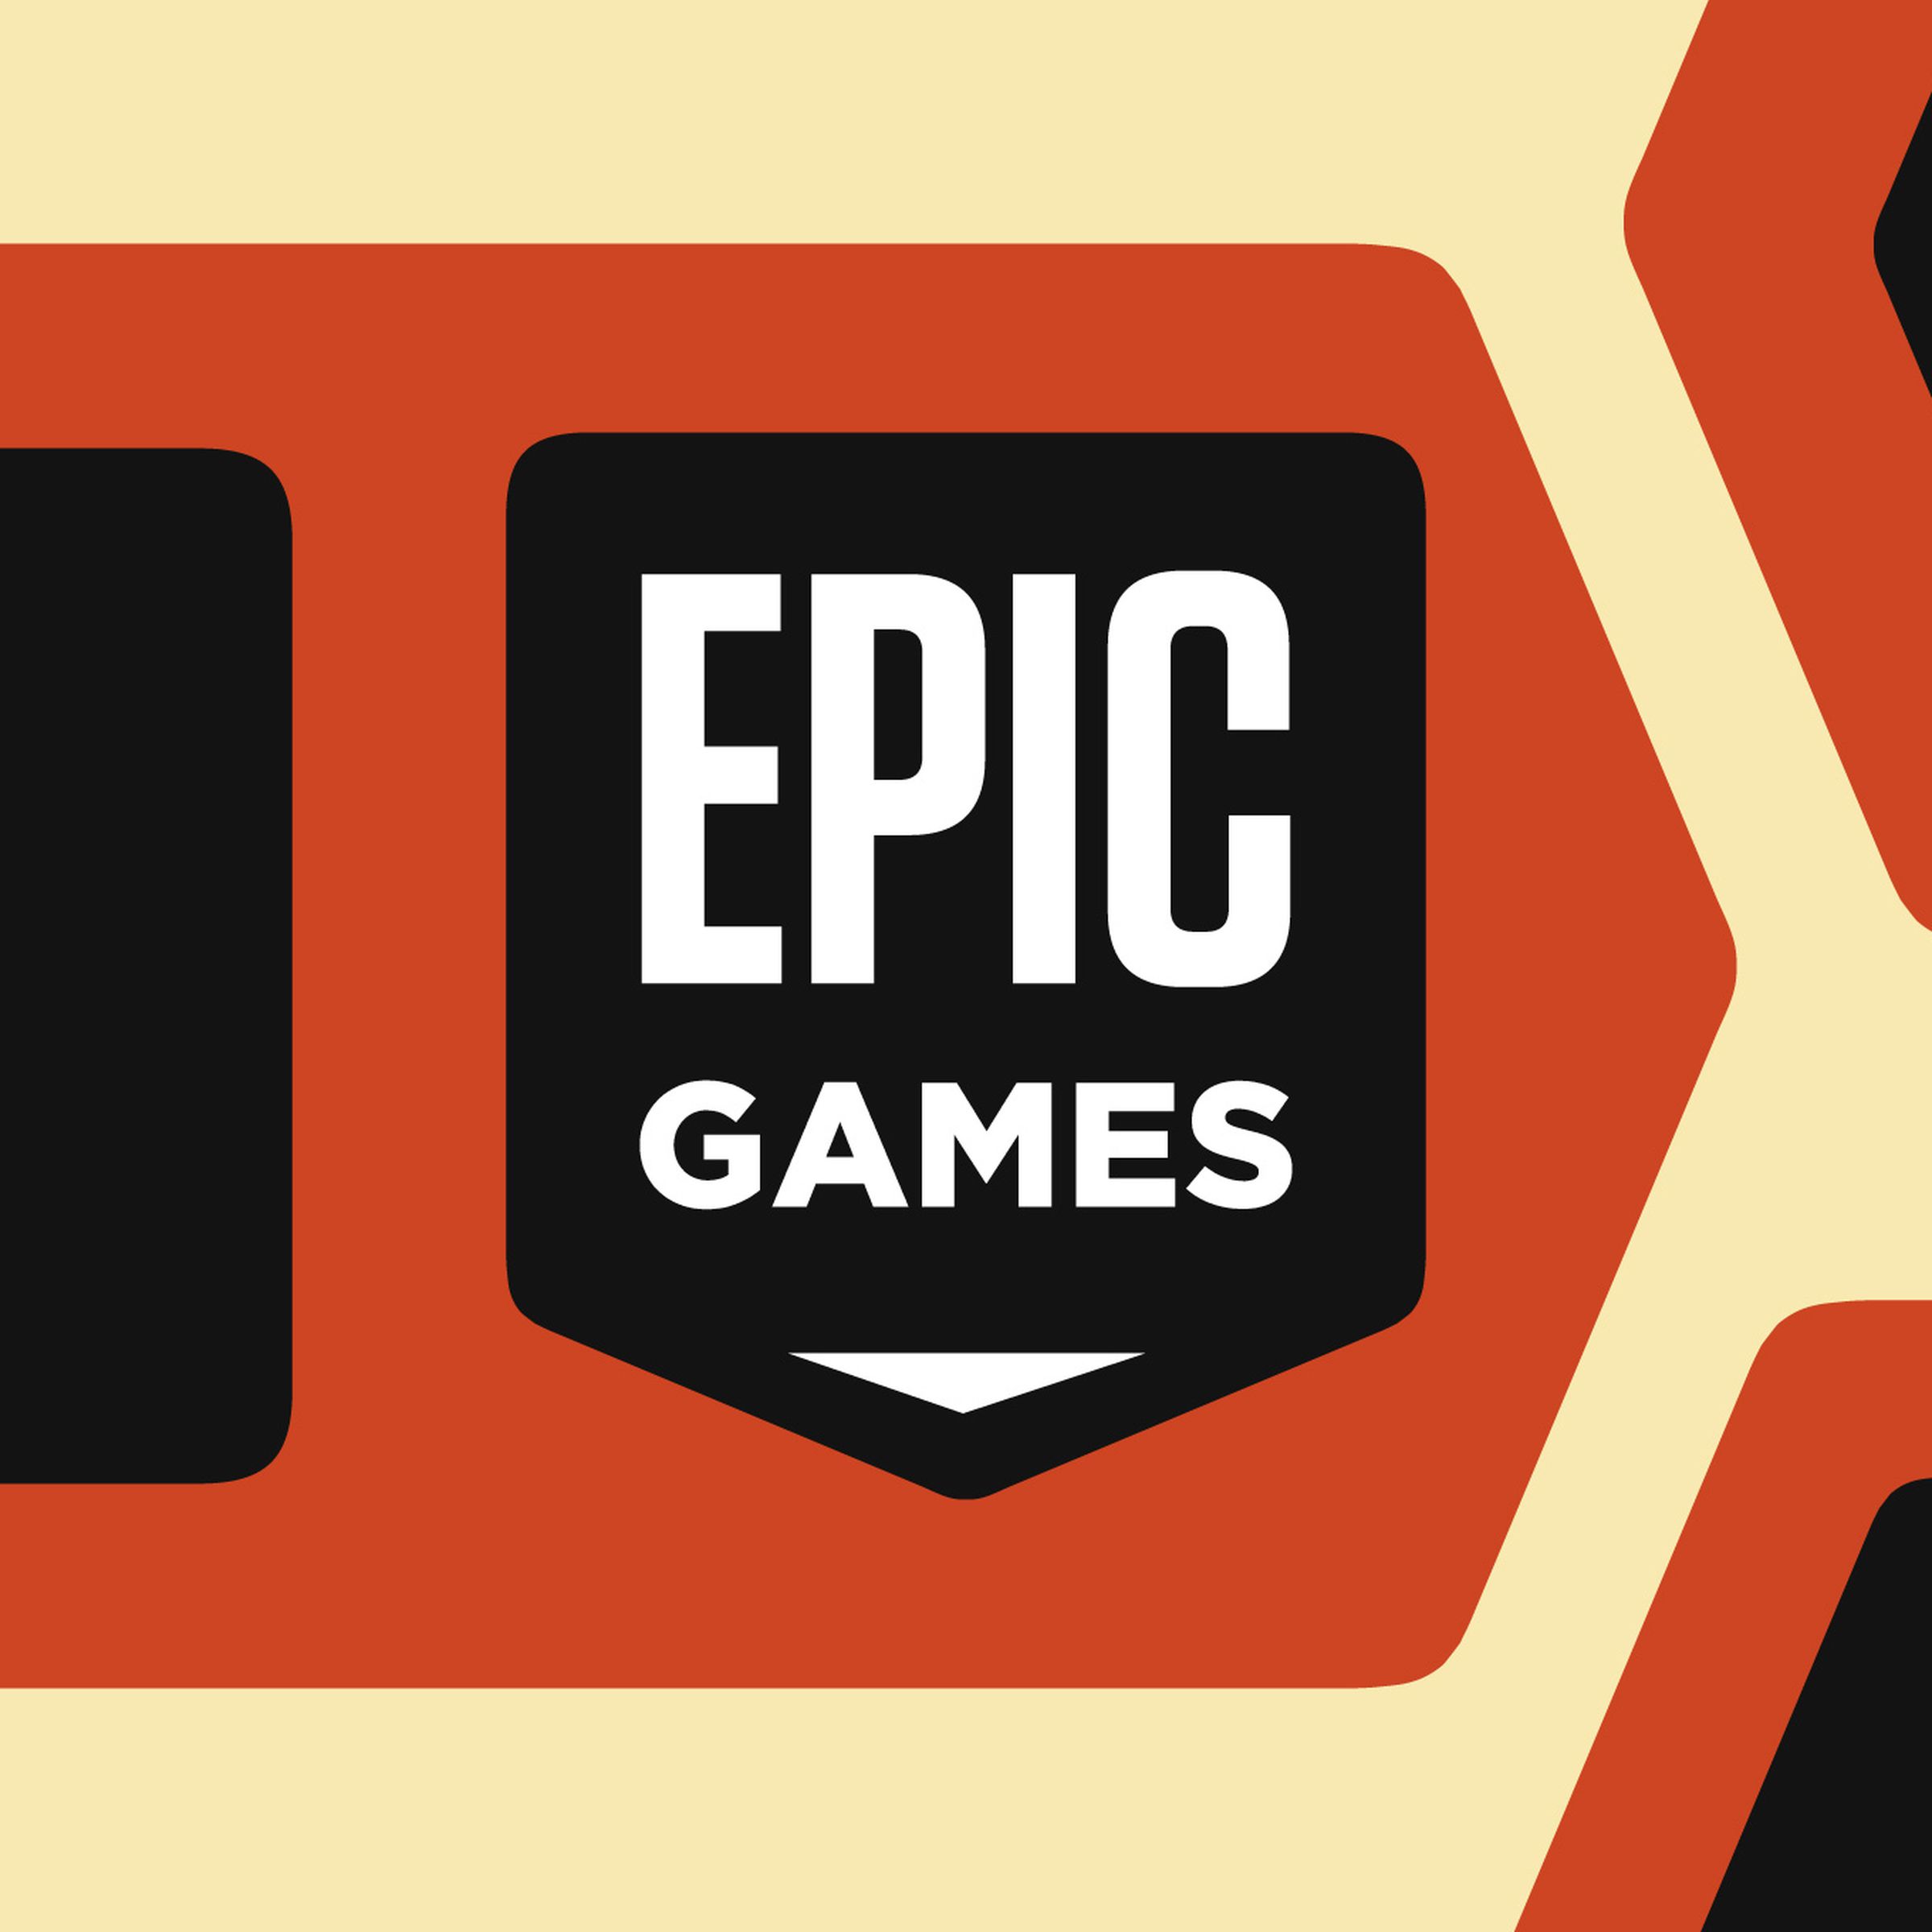 An illustration of the Epic Games logo.